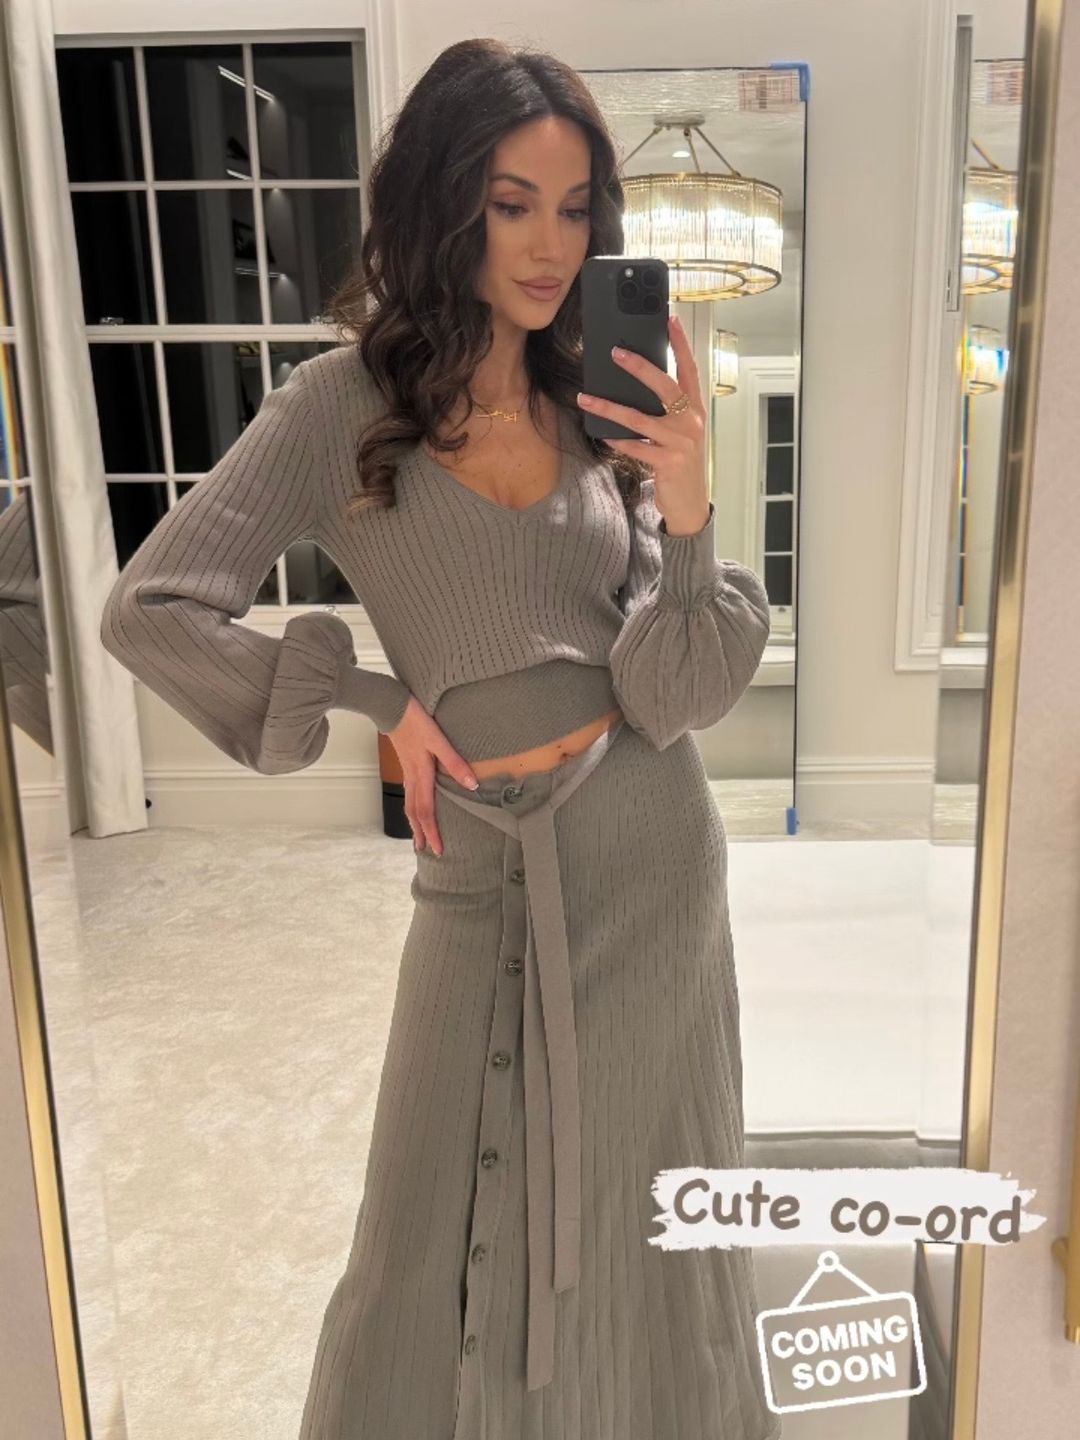 michelle keegan instagram knitted co ord 